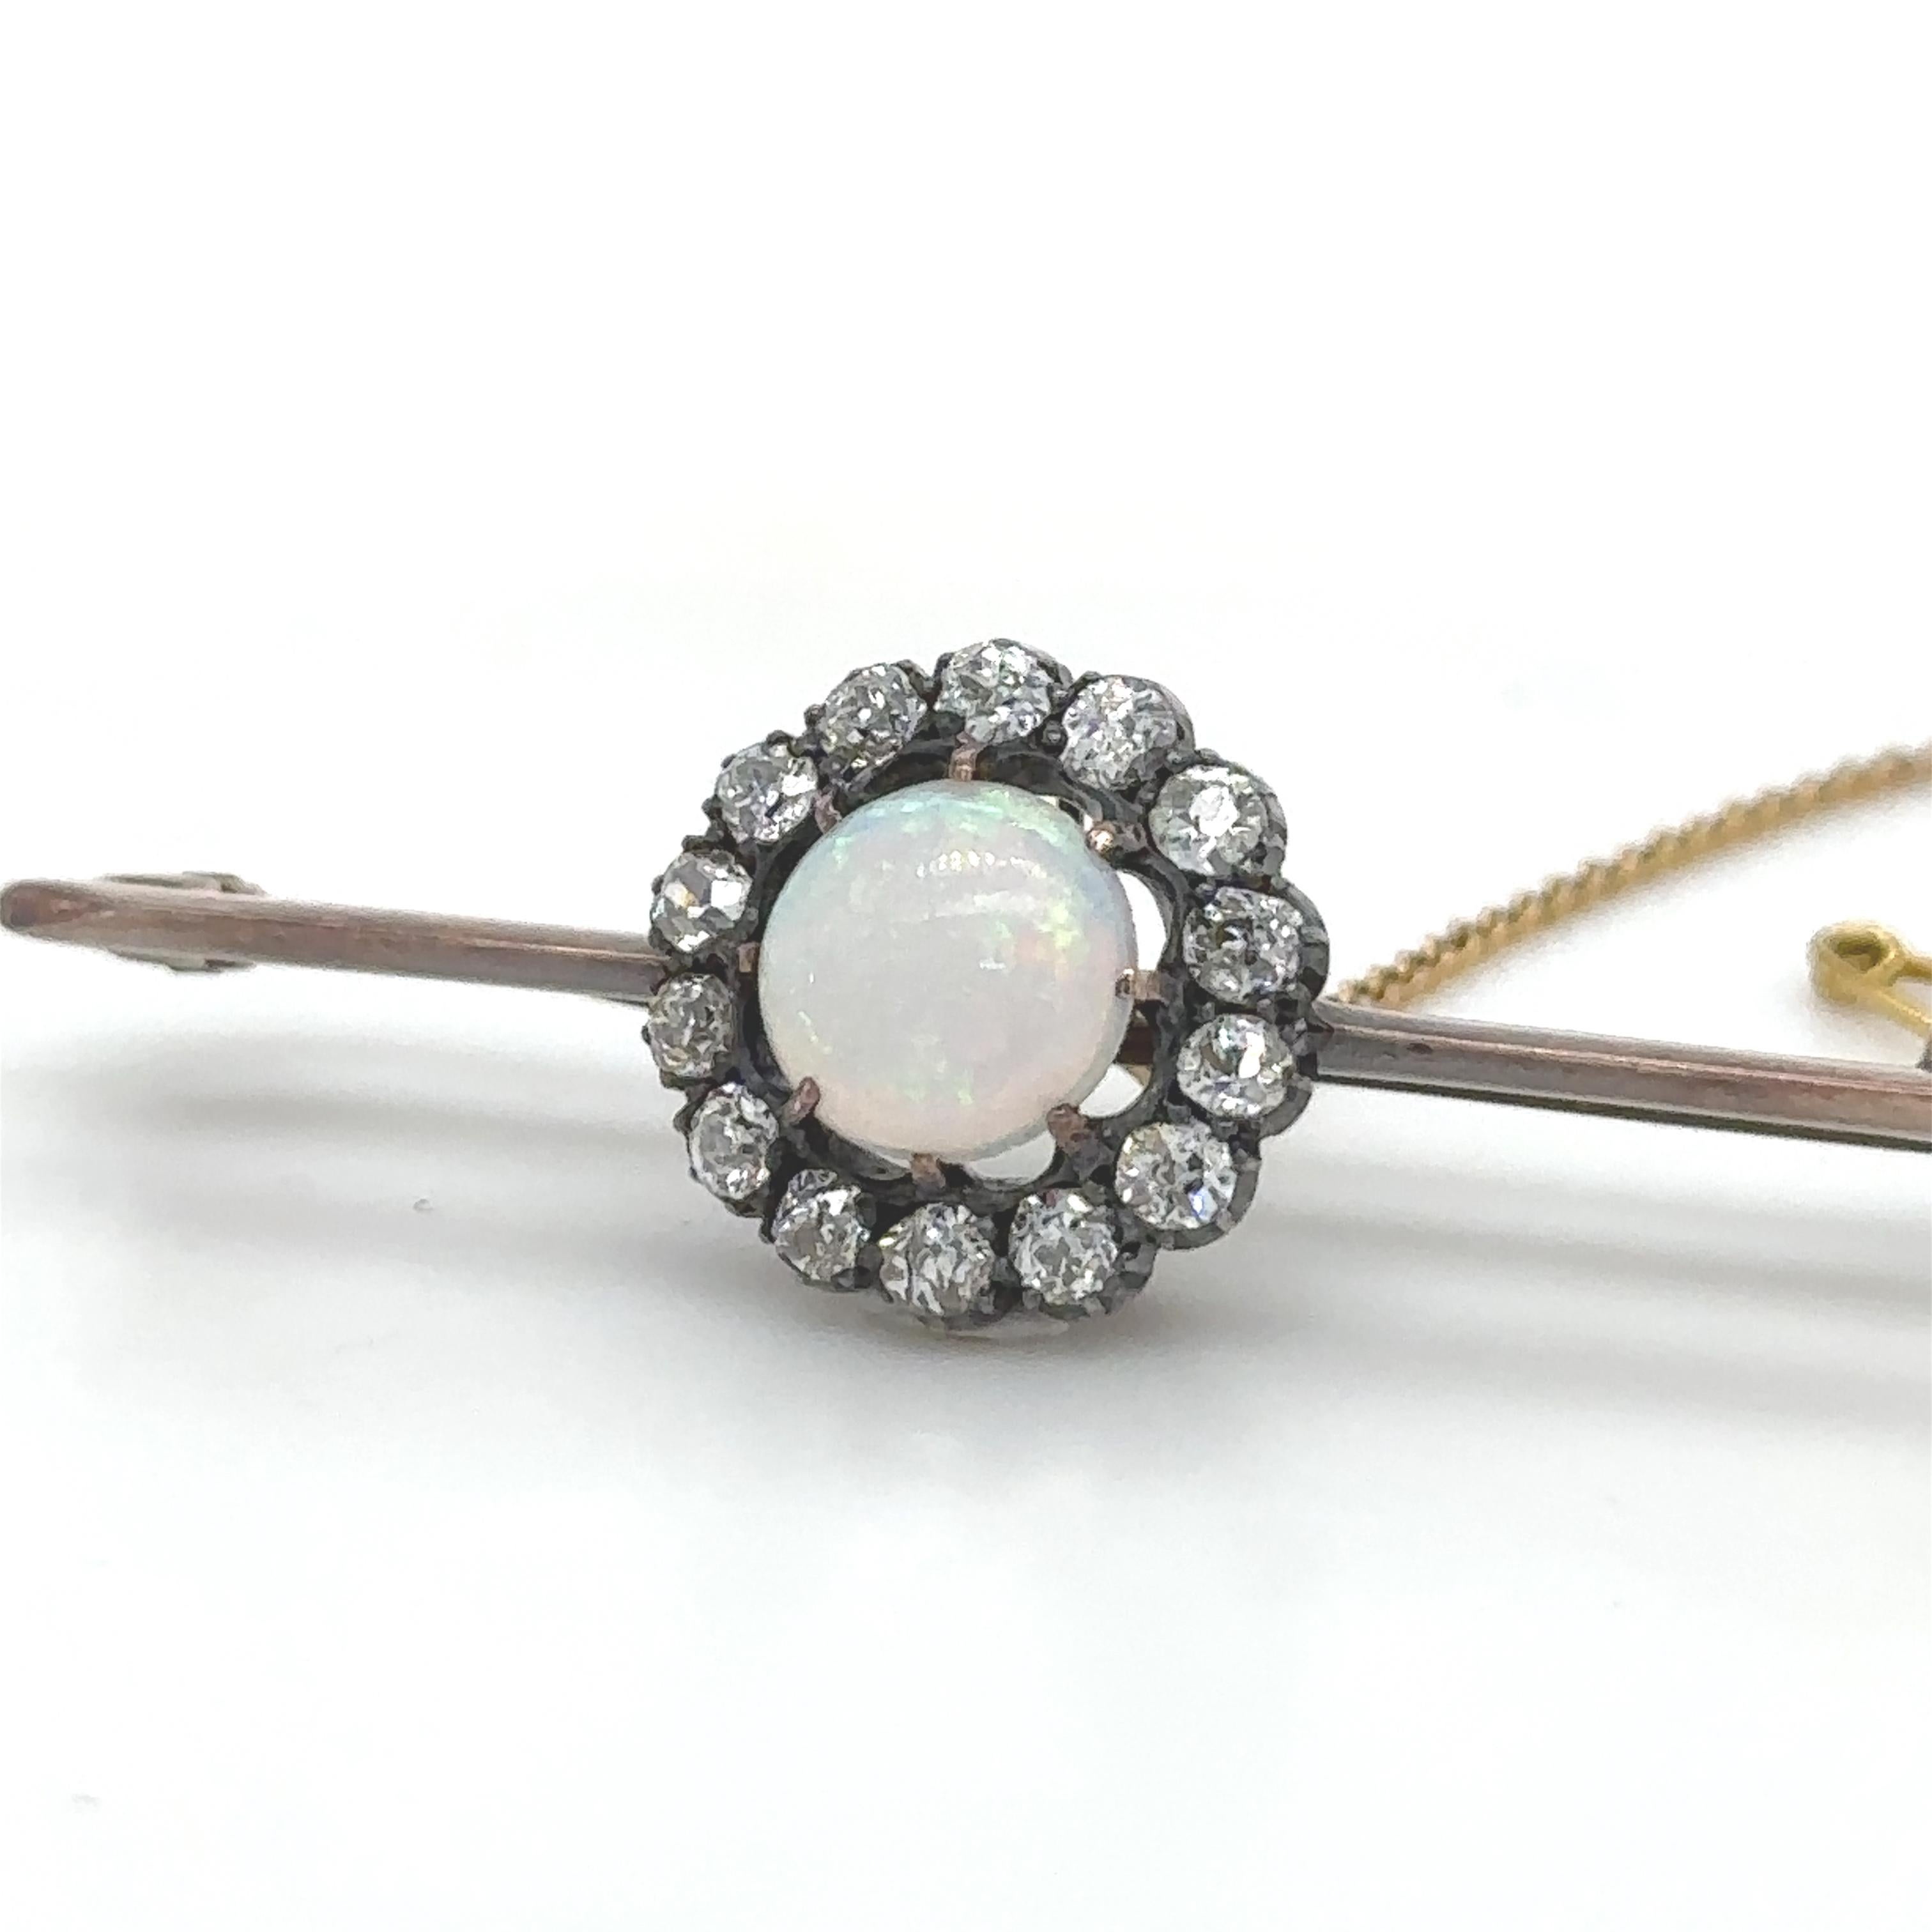 An Opal And Diamond Round Cluster Bar Brooch, with a round solid white crystal opal within a border of 14 old cut diamonds set in silver and 9ct rose gold.

Opal 1.00ct (estimated), 8mm round, 2.5mm depth, medium quality.

Diamonds 14 = 0.84ct